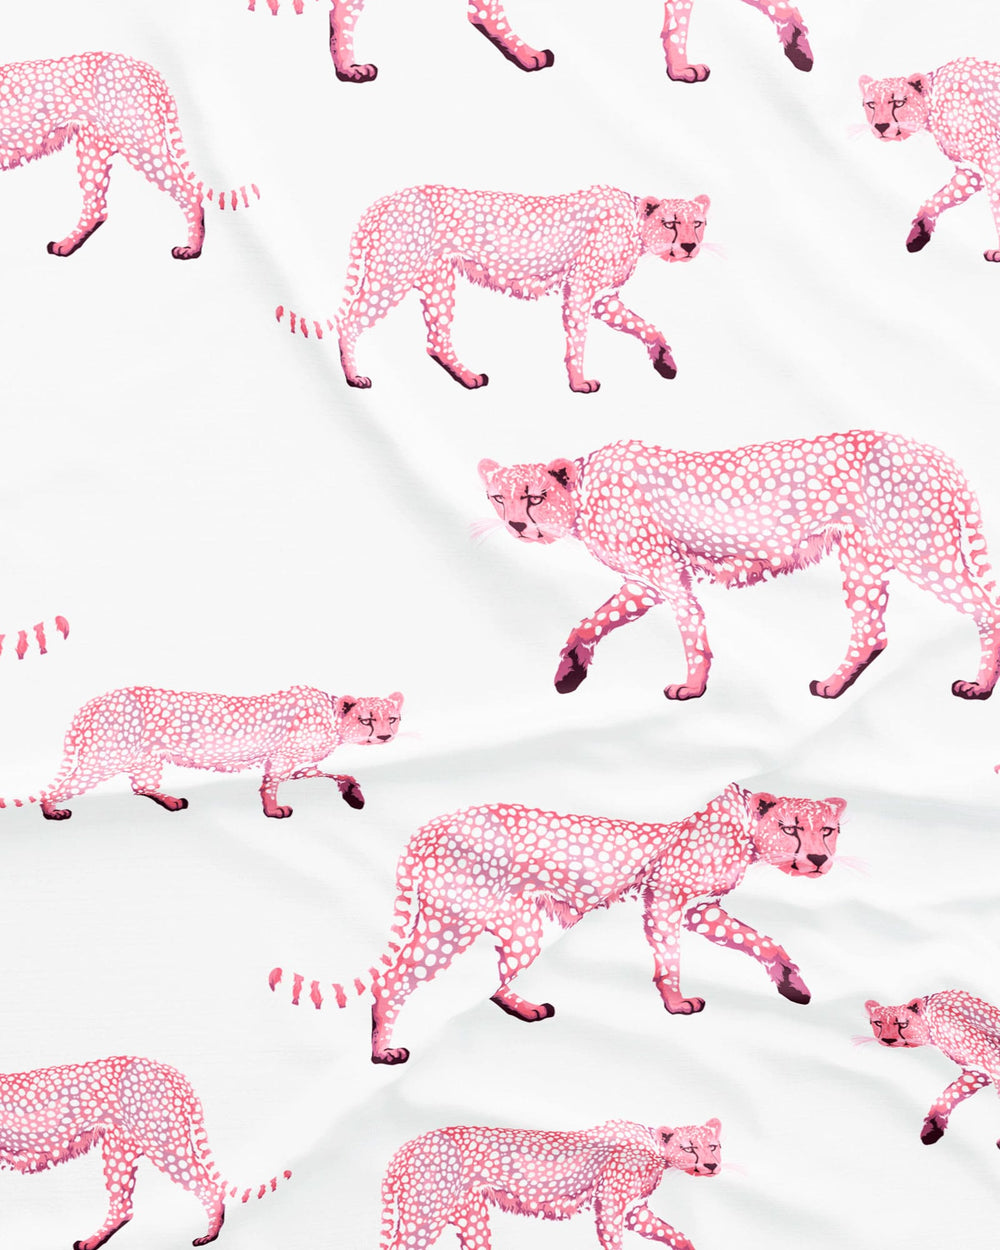 Mens lounge shorts with a pattern of pink cheetahs on a white background